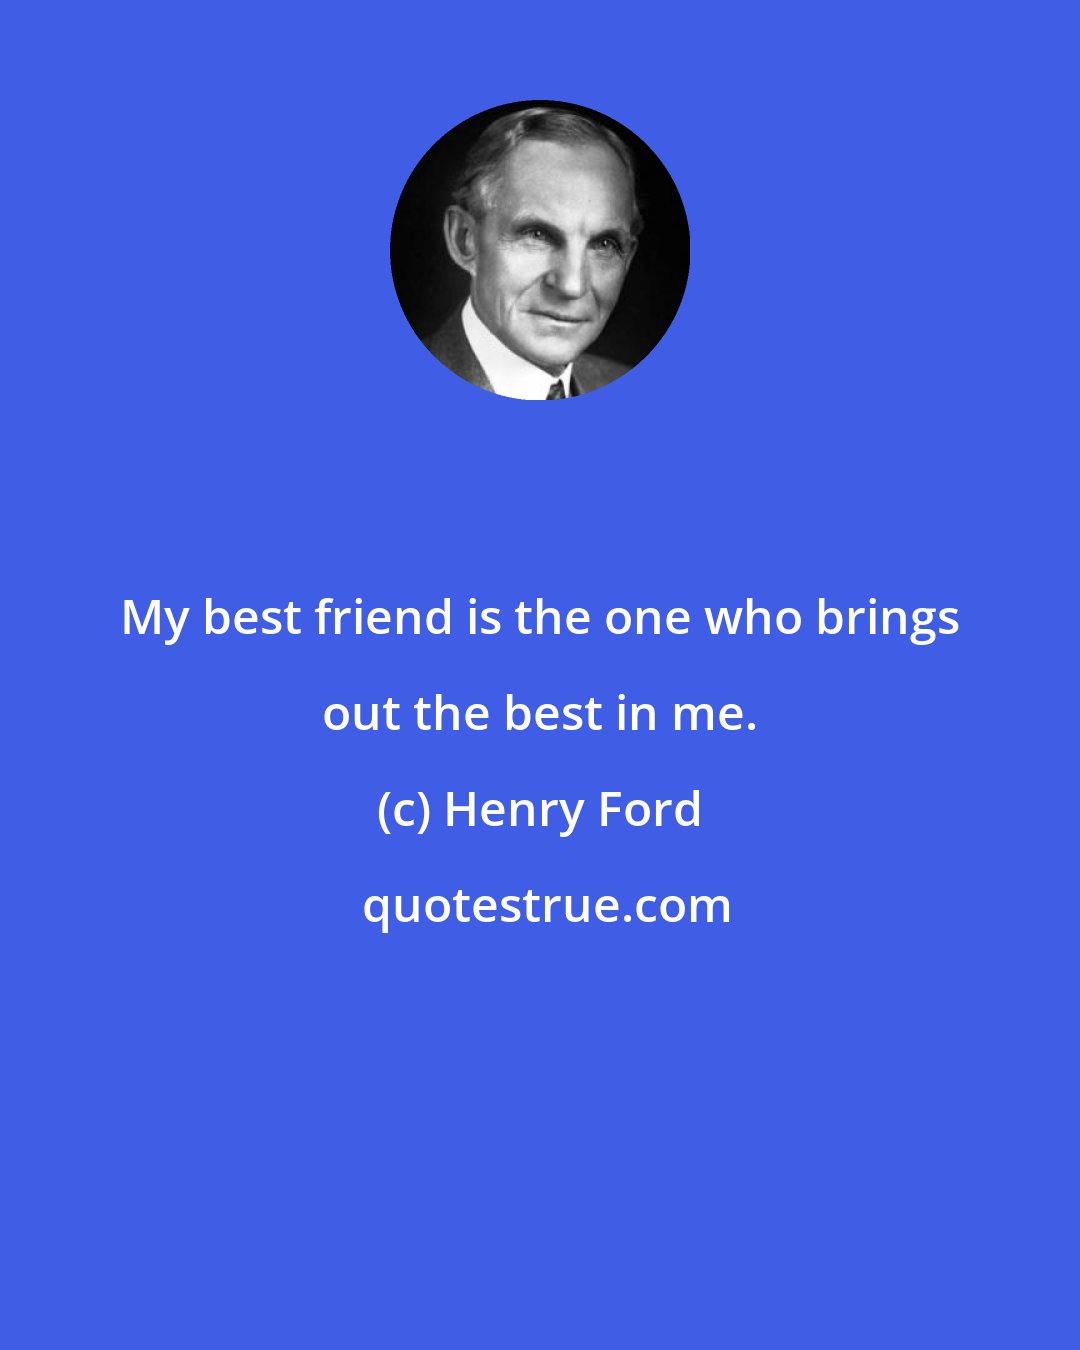 Henry Ford: My best friend is the one who brings out the best in me.